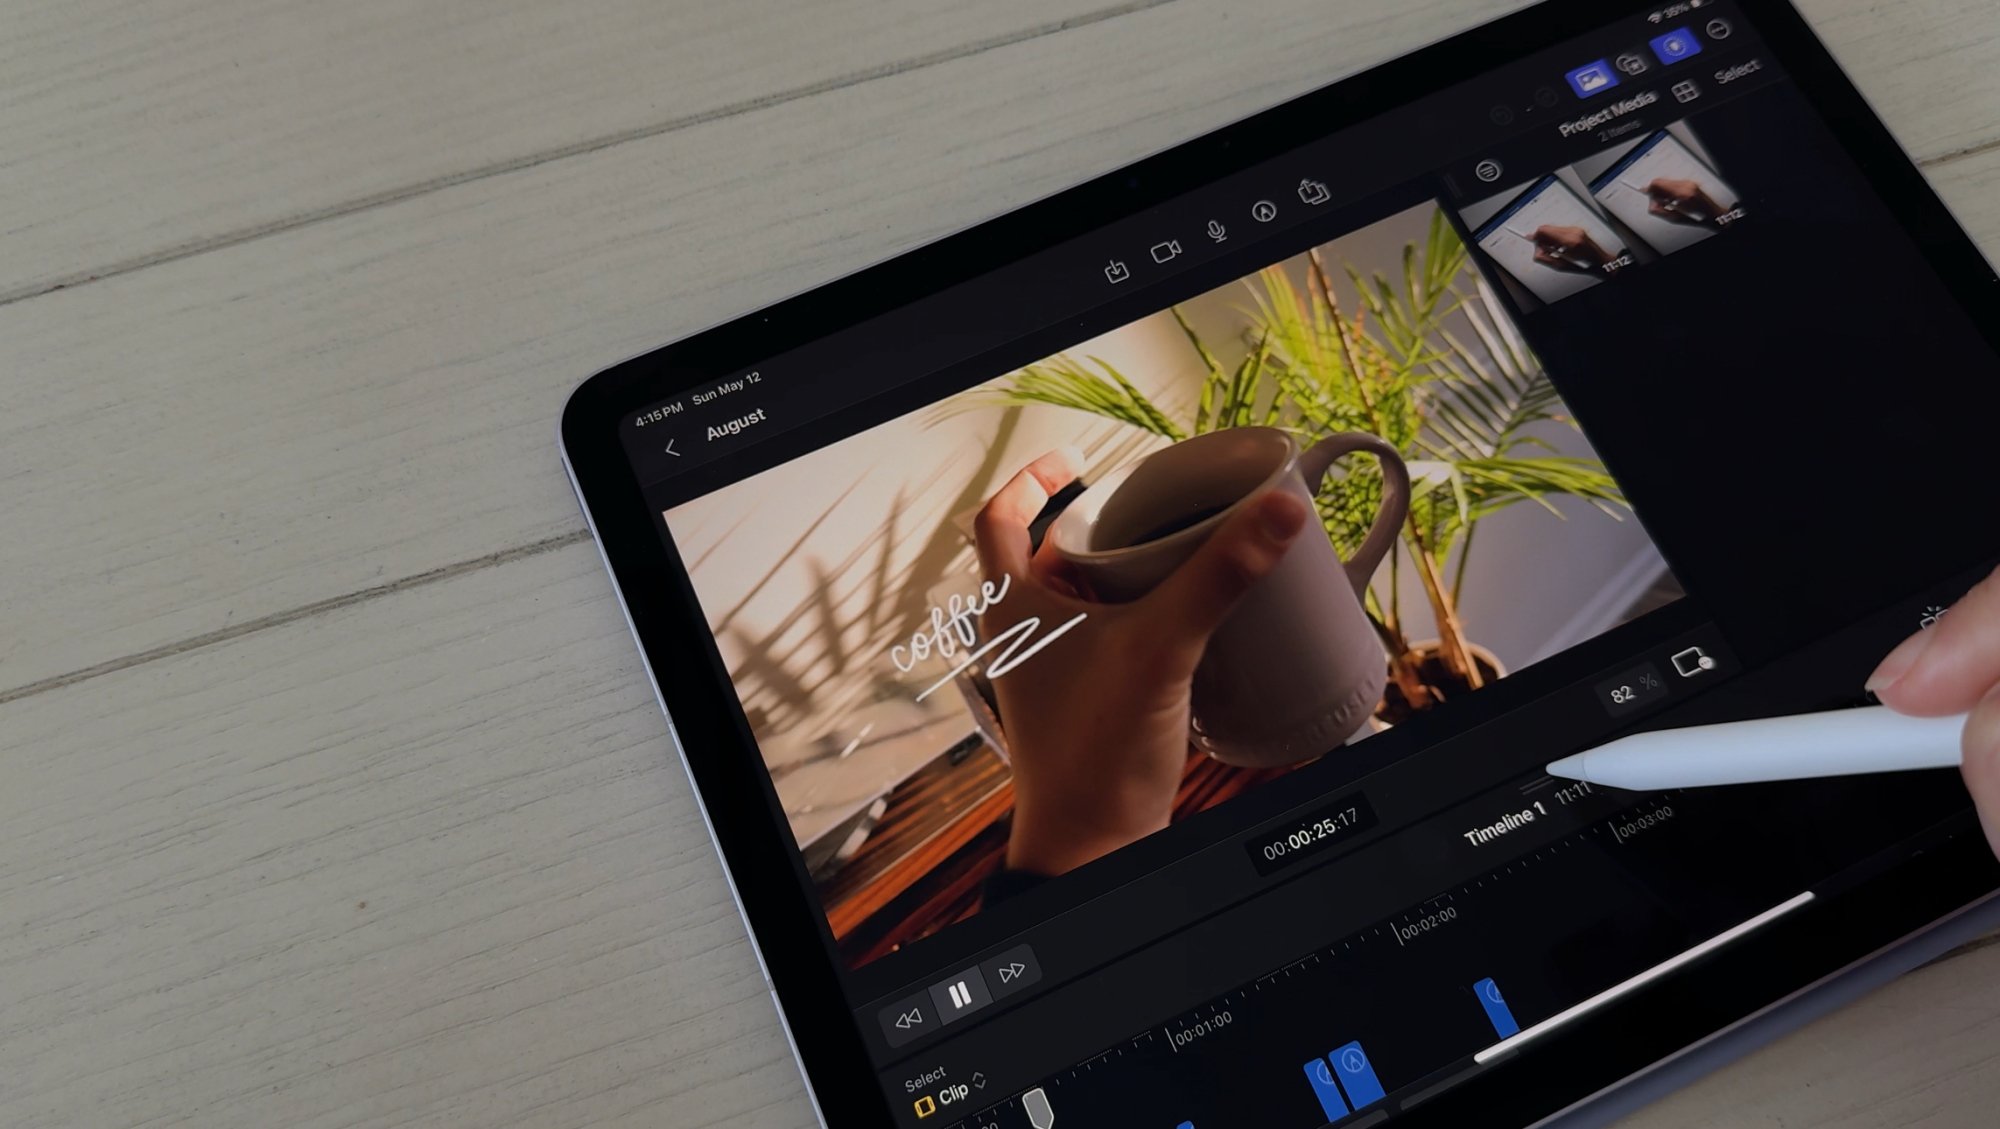 Video editing on the 13-inch iPad Air